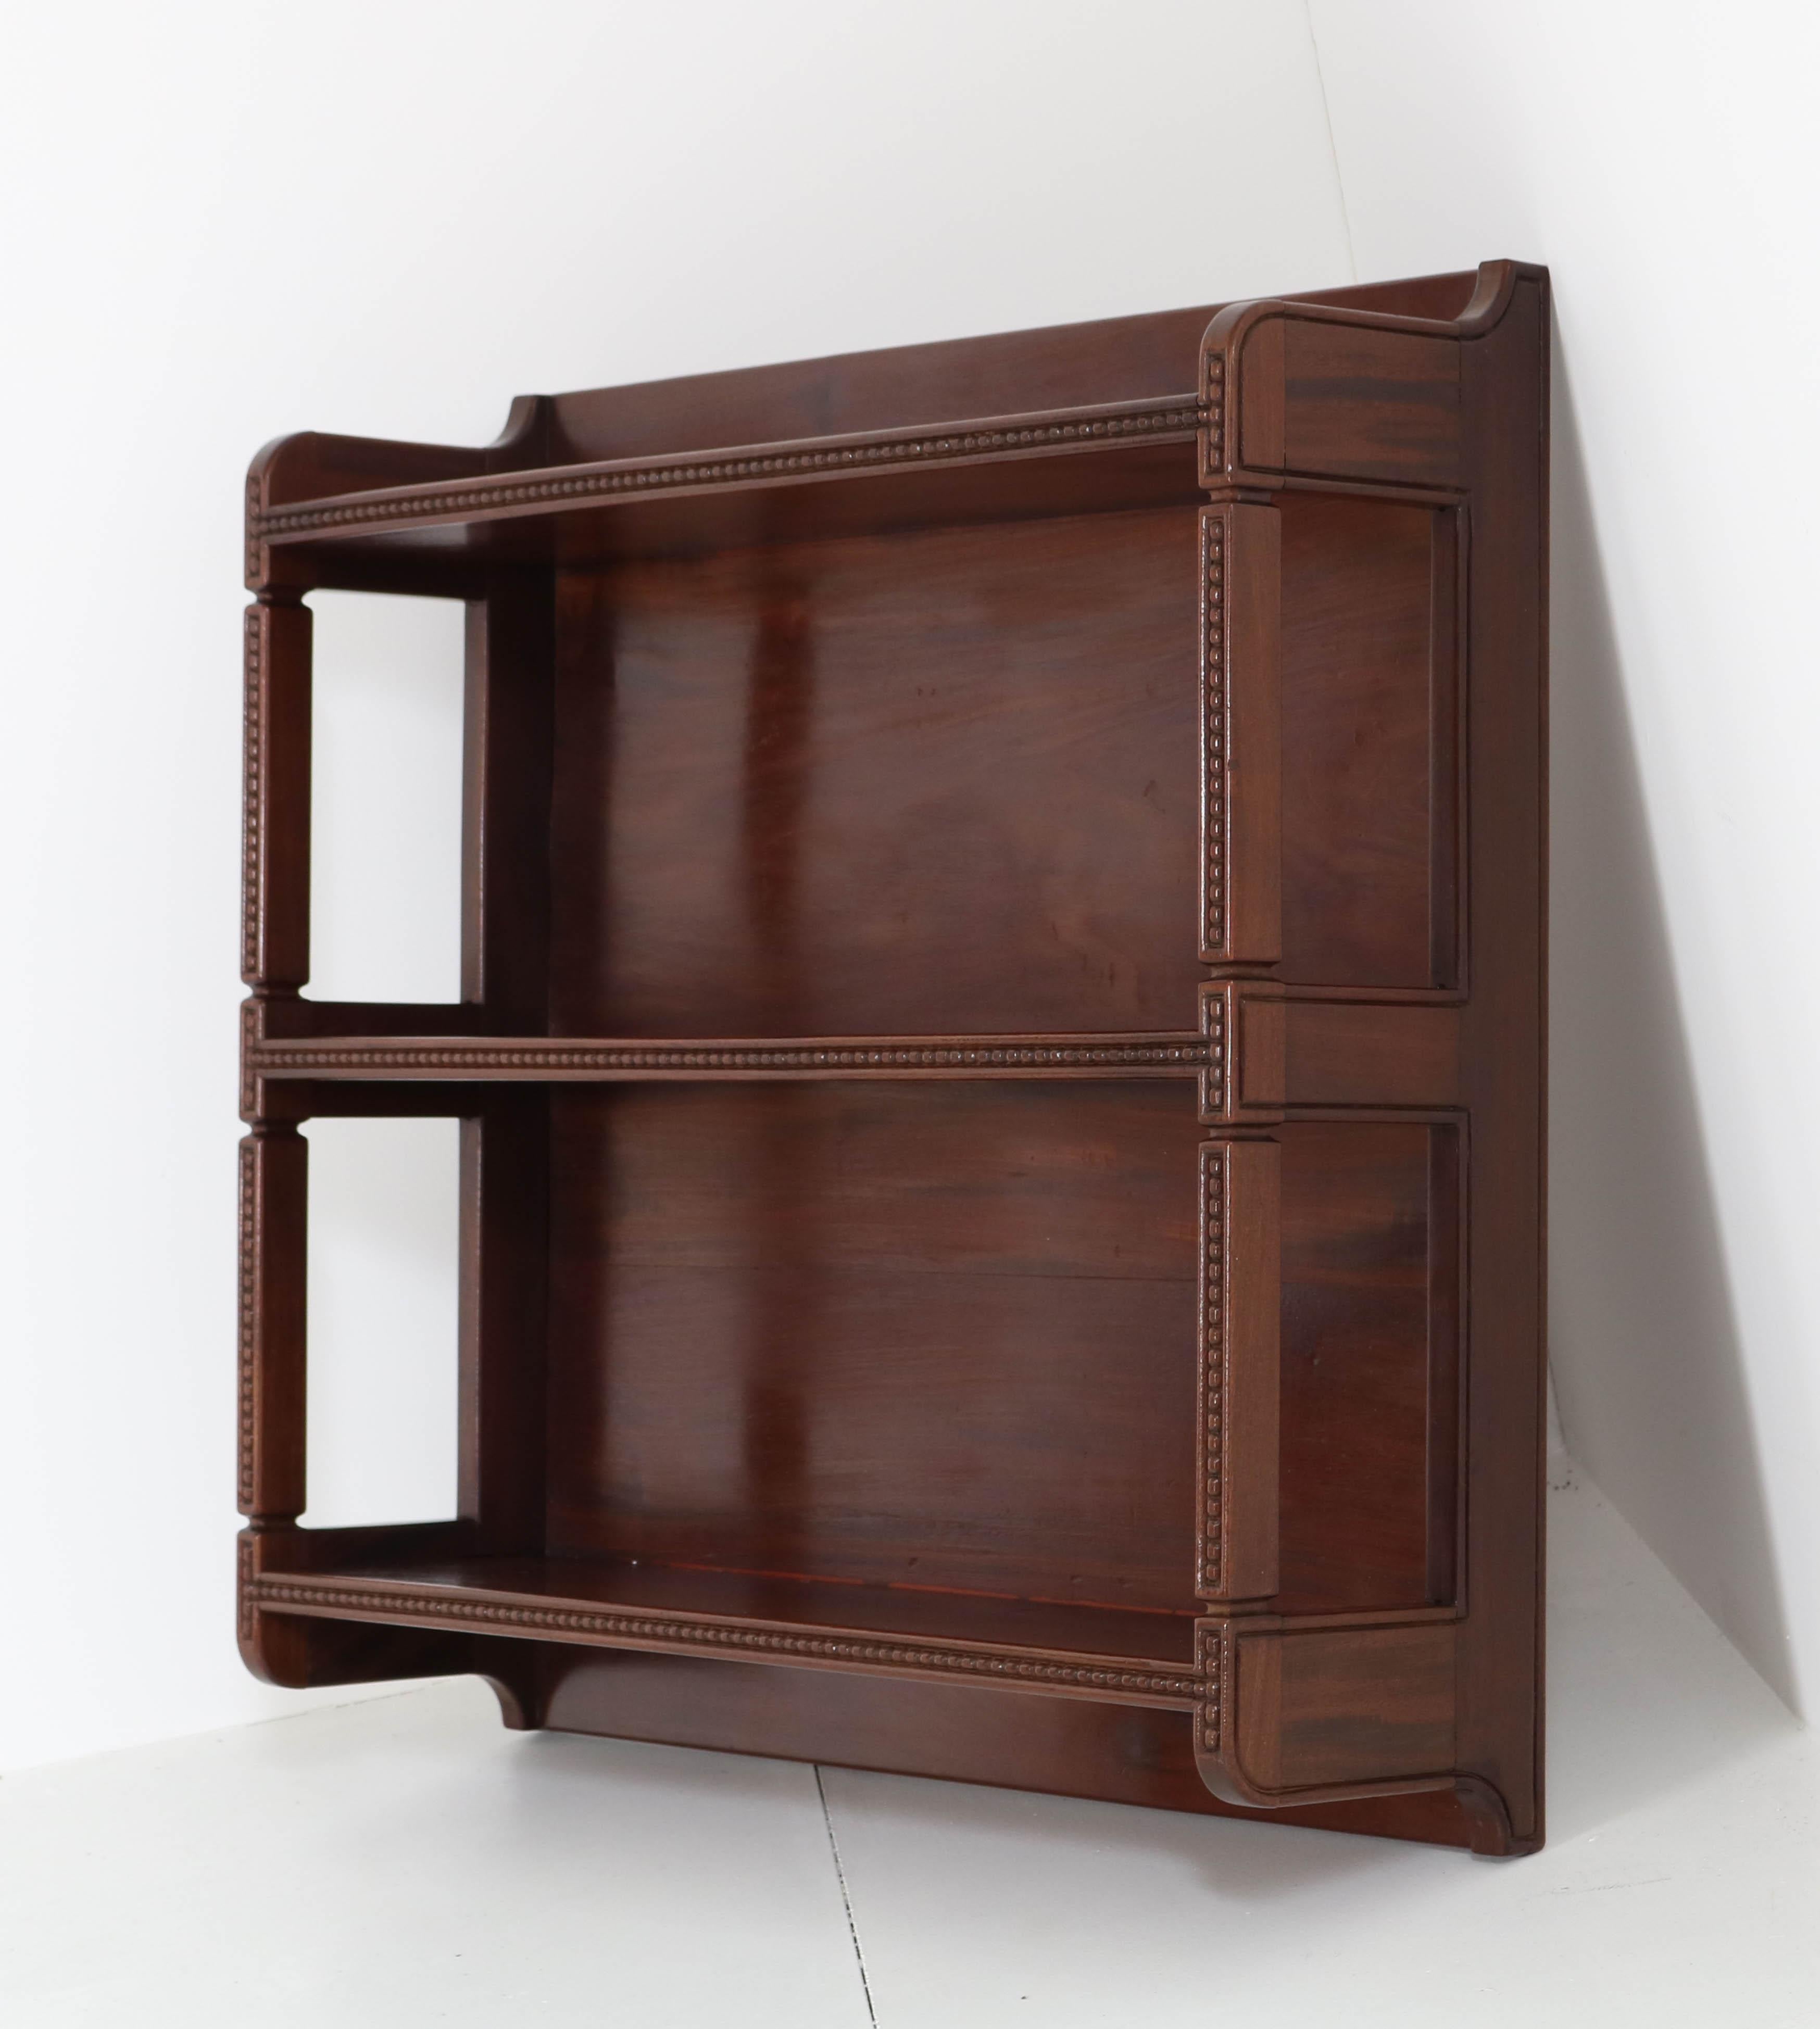 Magnificent and rare Art Nouveau Arts & Crafts hanging shelf étagère.
Design by K.P.C. de Bazel.
Striking Dutch design from the 1900s.
Solid mahogany with nice lining.
In very good condition with minor wear consistent with age and